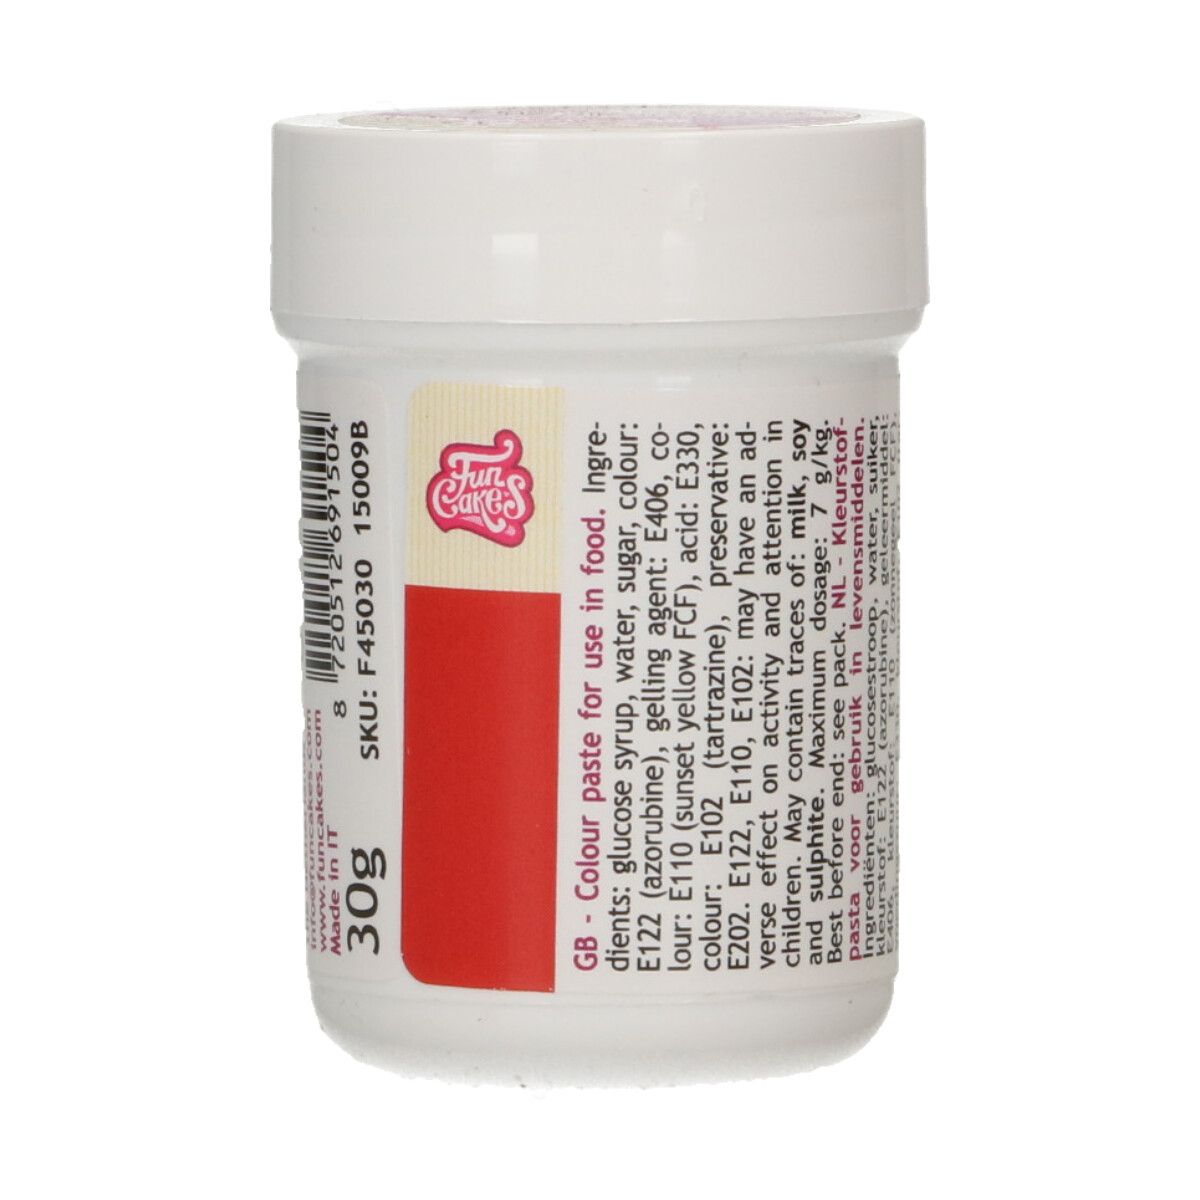 FUNCAKES FUNCOLOURS PASTE FOOD COLOUR - CHRISTMAS RED 30G